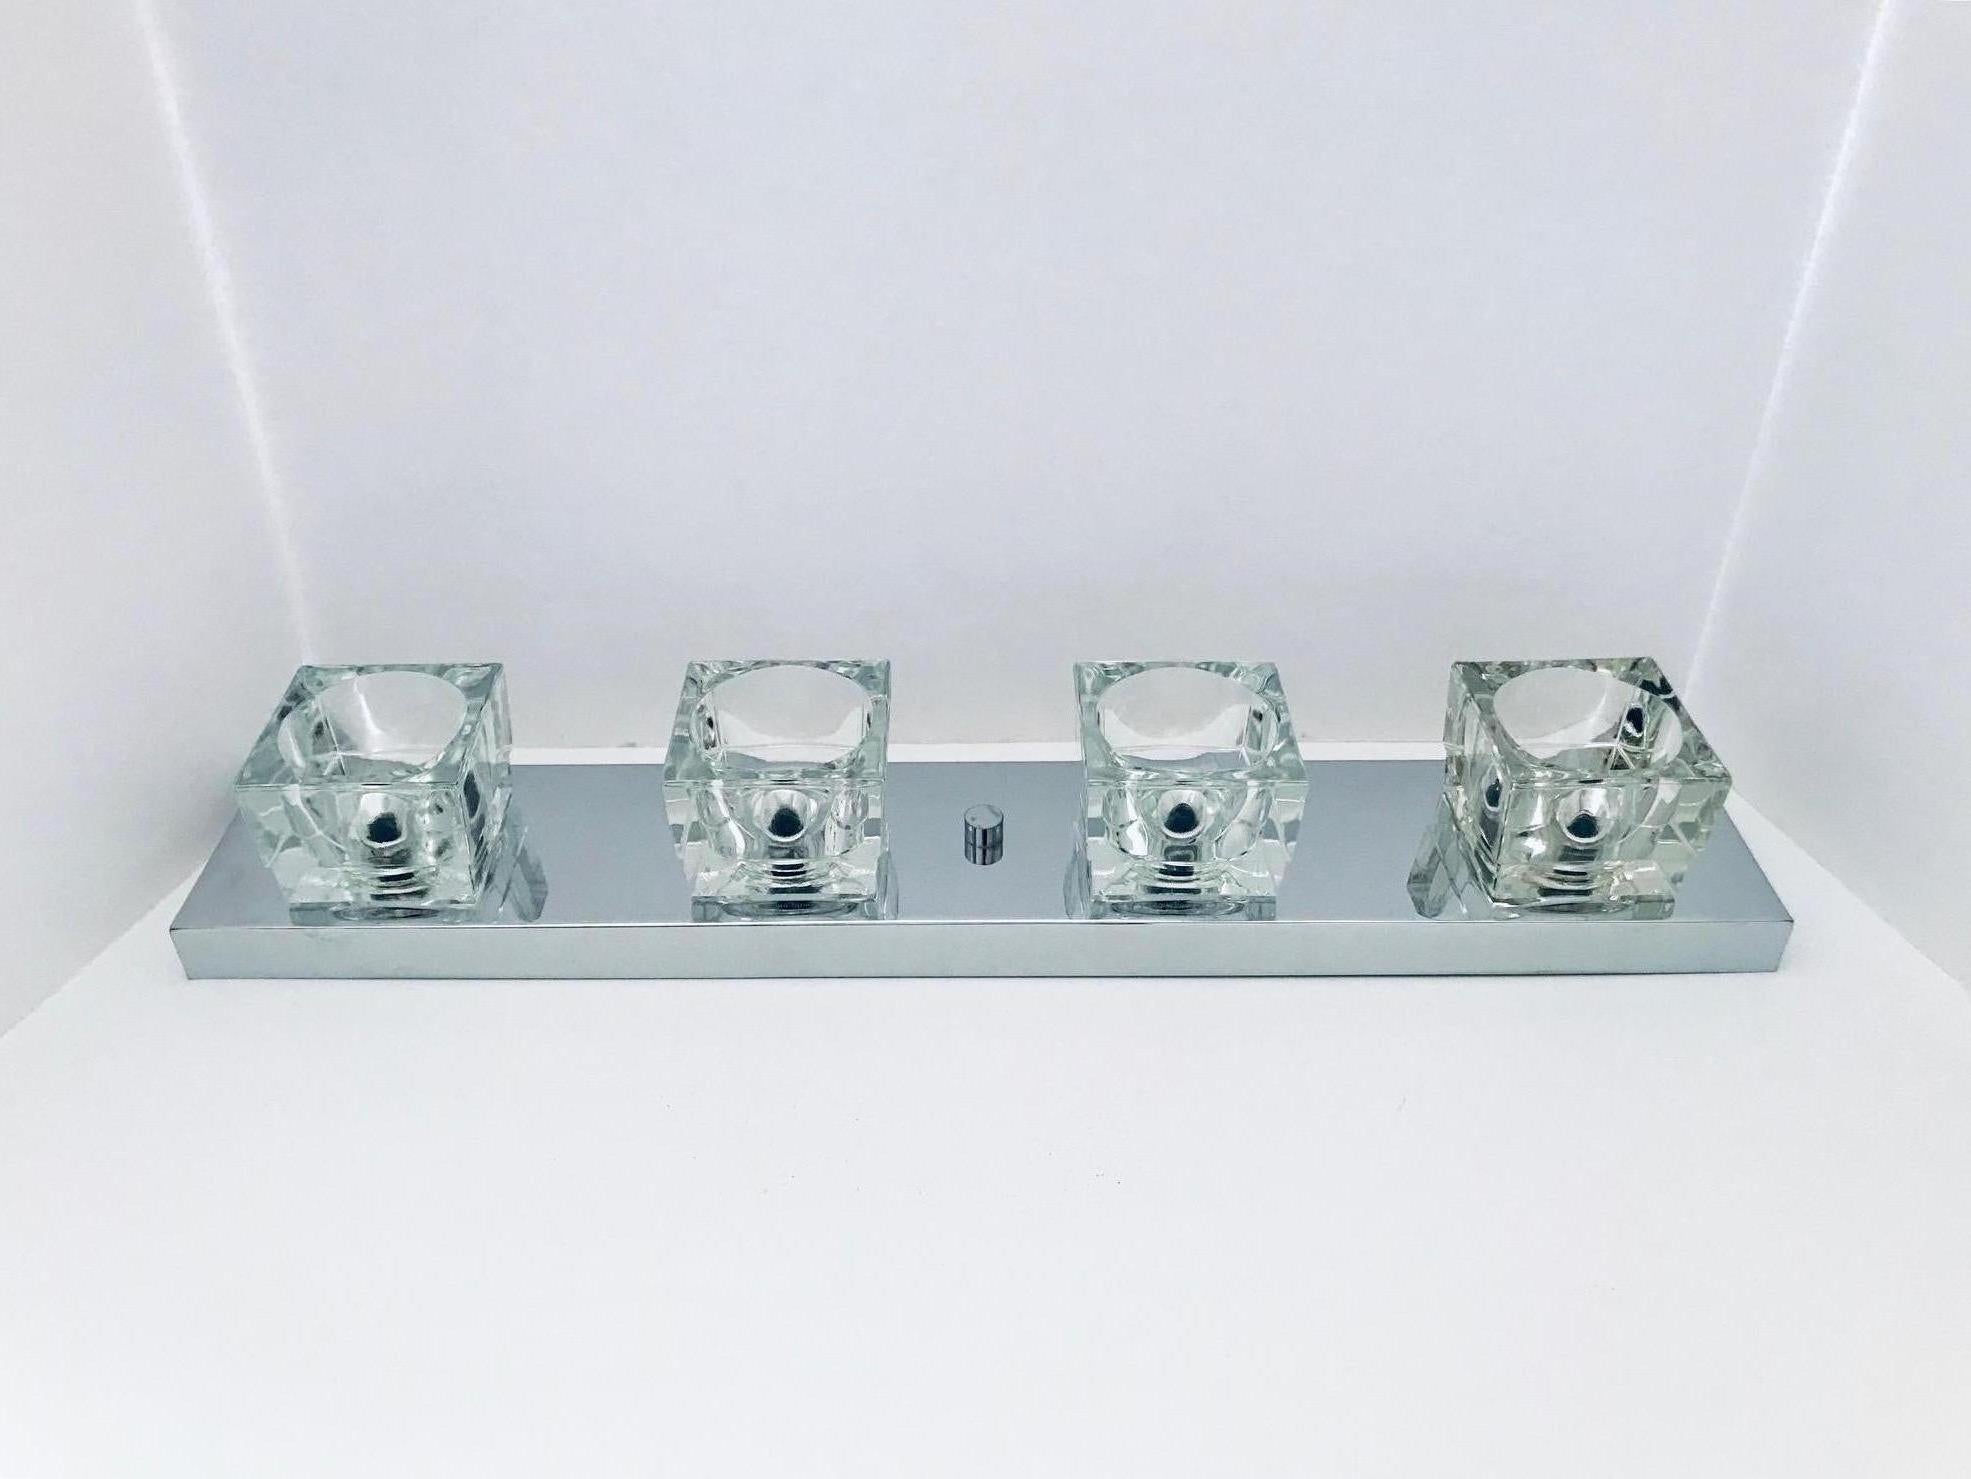 Italian Mid-Century Modern sconce featuring four molded glass block shades. Cubist design in polished chrome with chrome centre finial. Can be is mounted vertically or horizontally. Newly re-plated in chrome.
Makes great powder room vanity light.